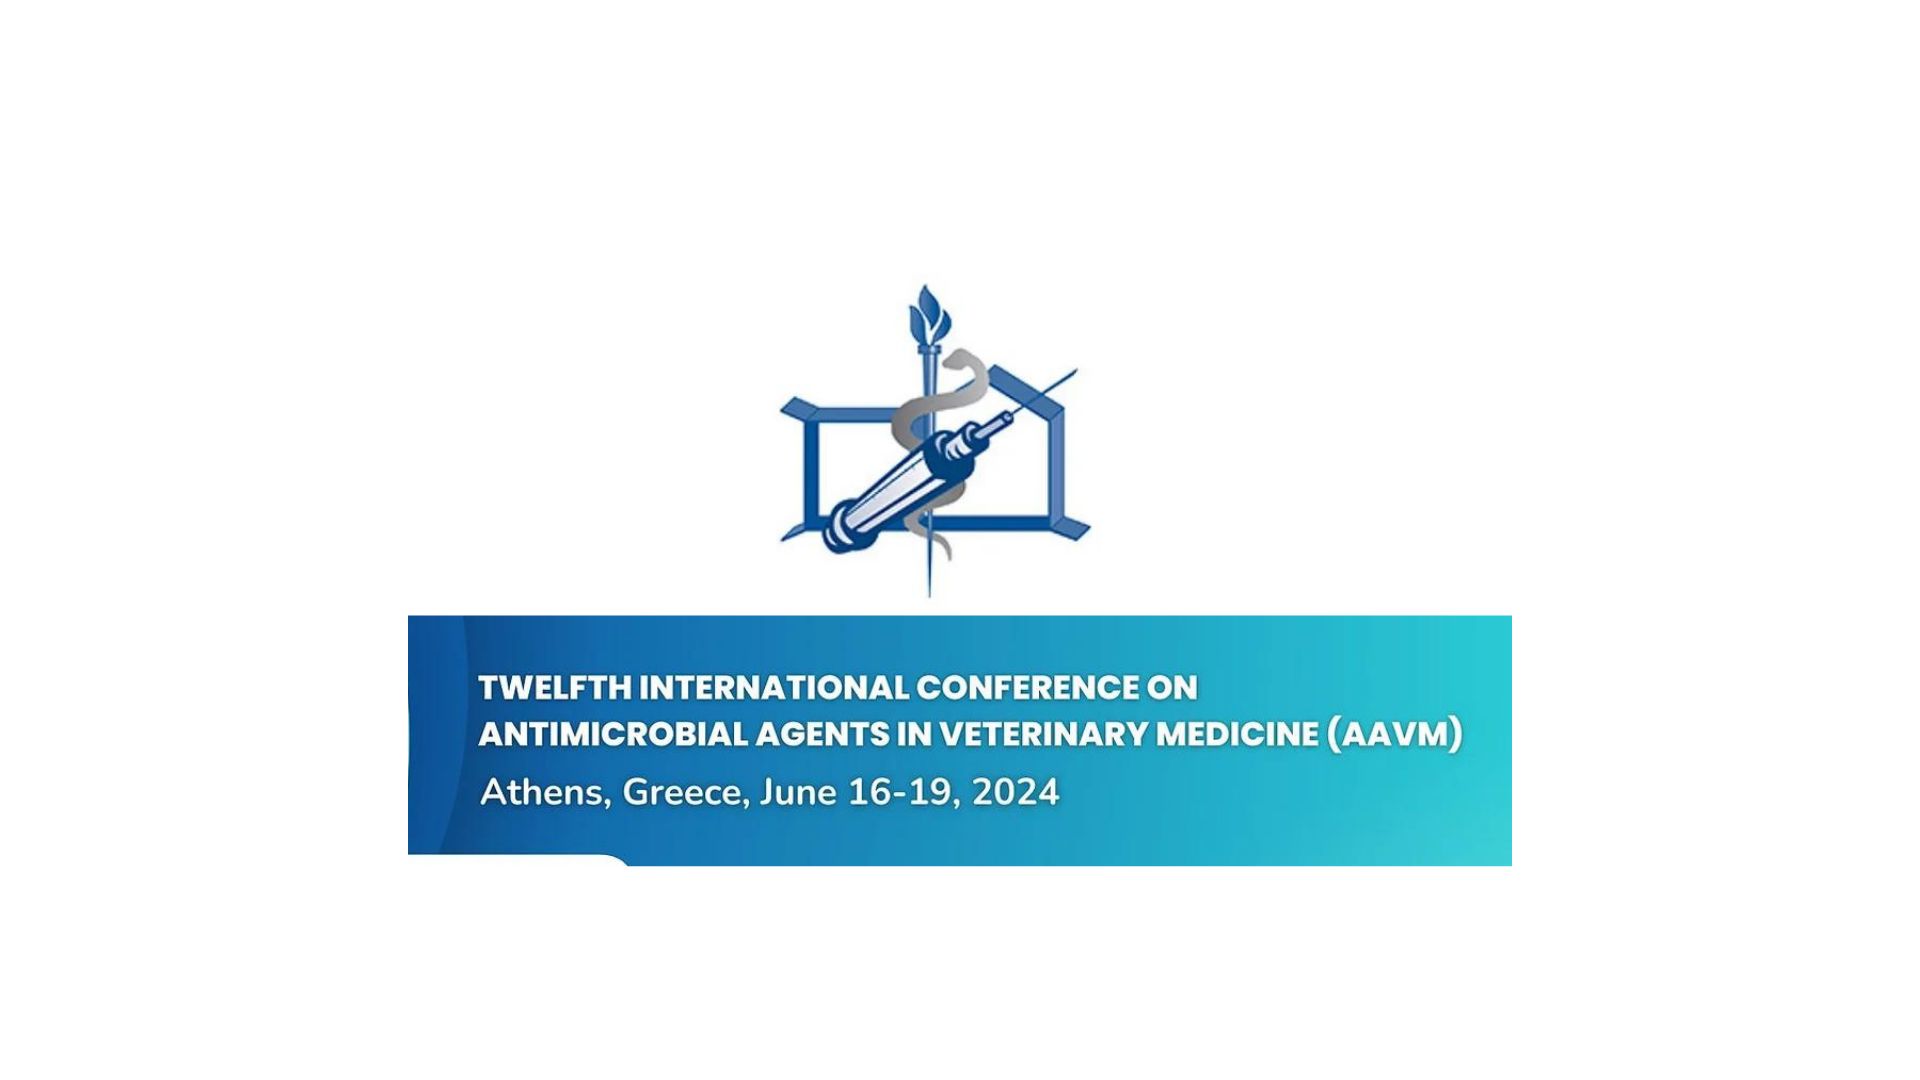 AAVM 2024 - Twelfth International Conference on Antimicrobial Agents in Veterinary Medicine, Athina, Greece